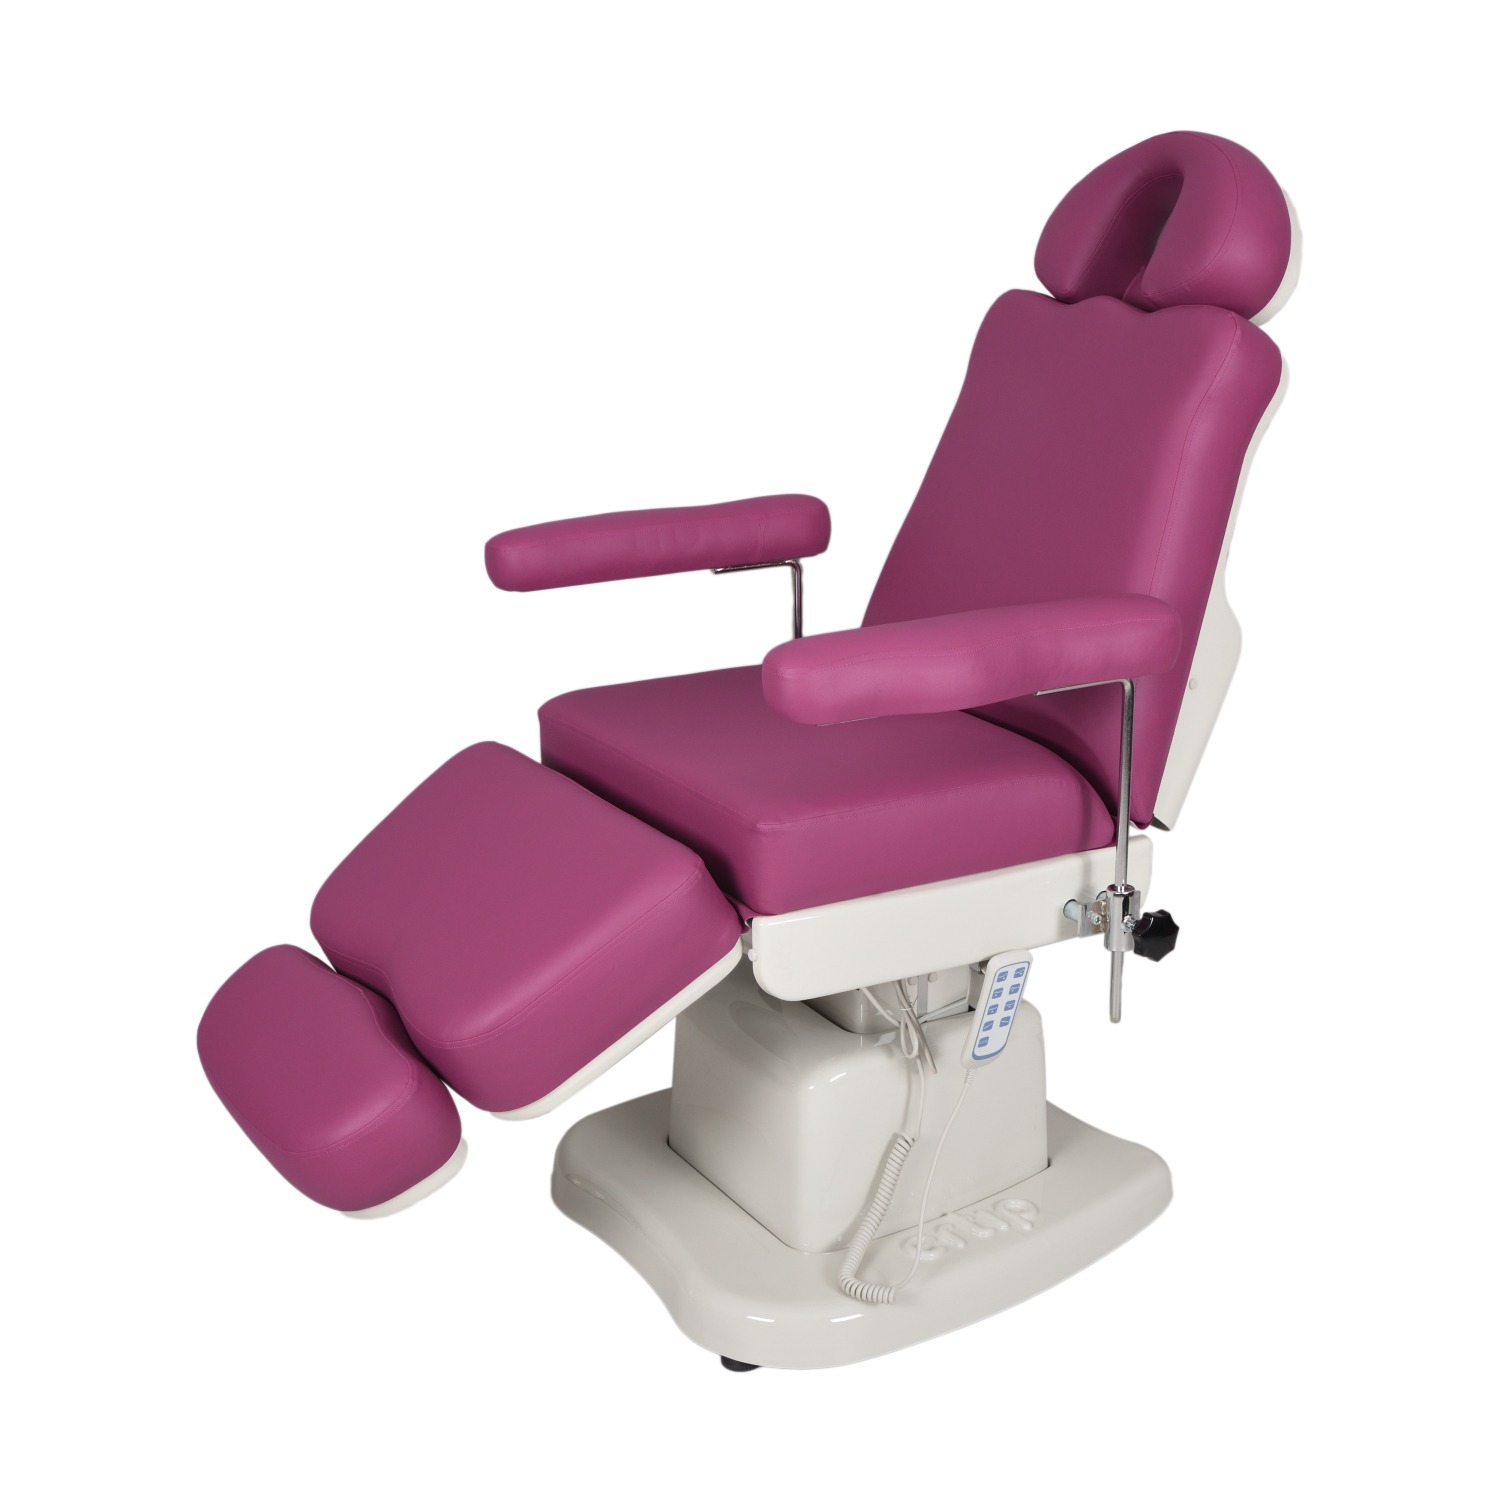 ELEGANCE Hair Transplant and Medical Aesthetic Chair (Berry)